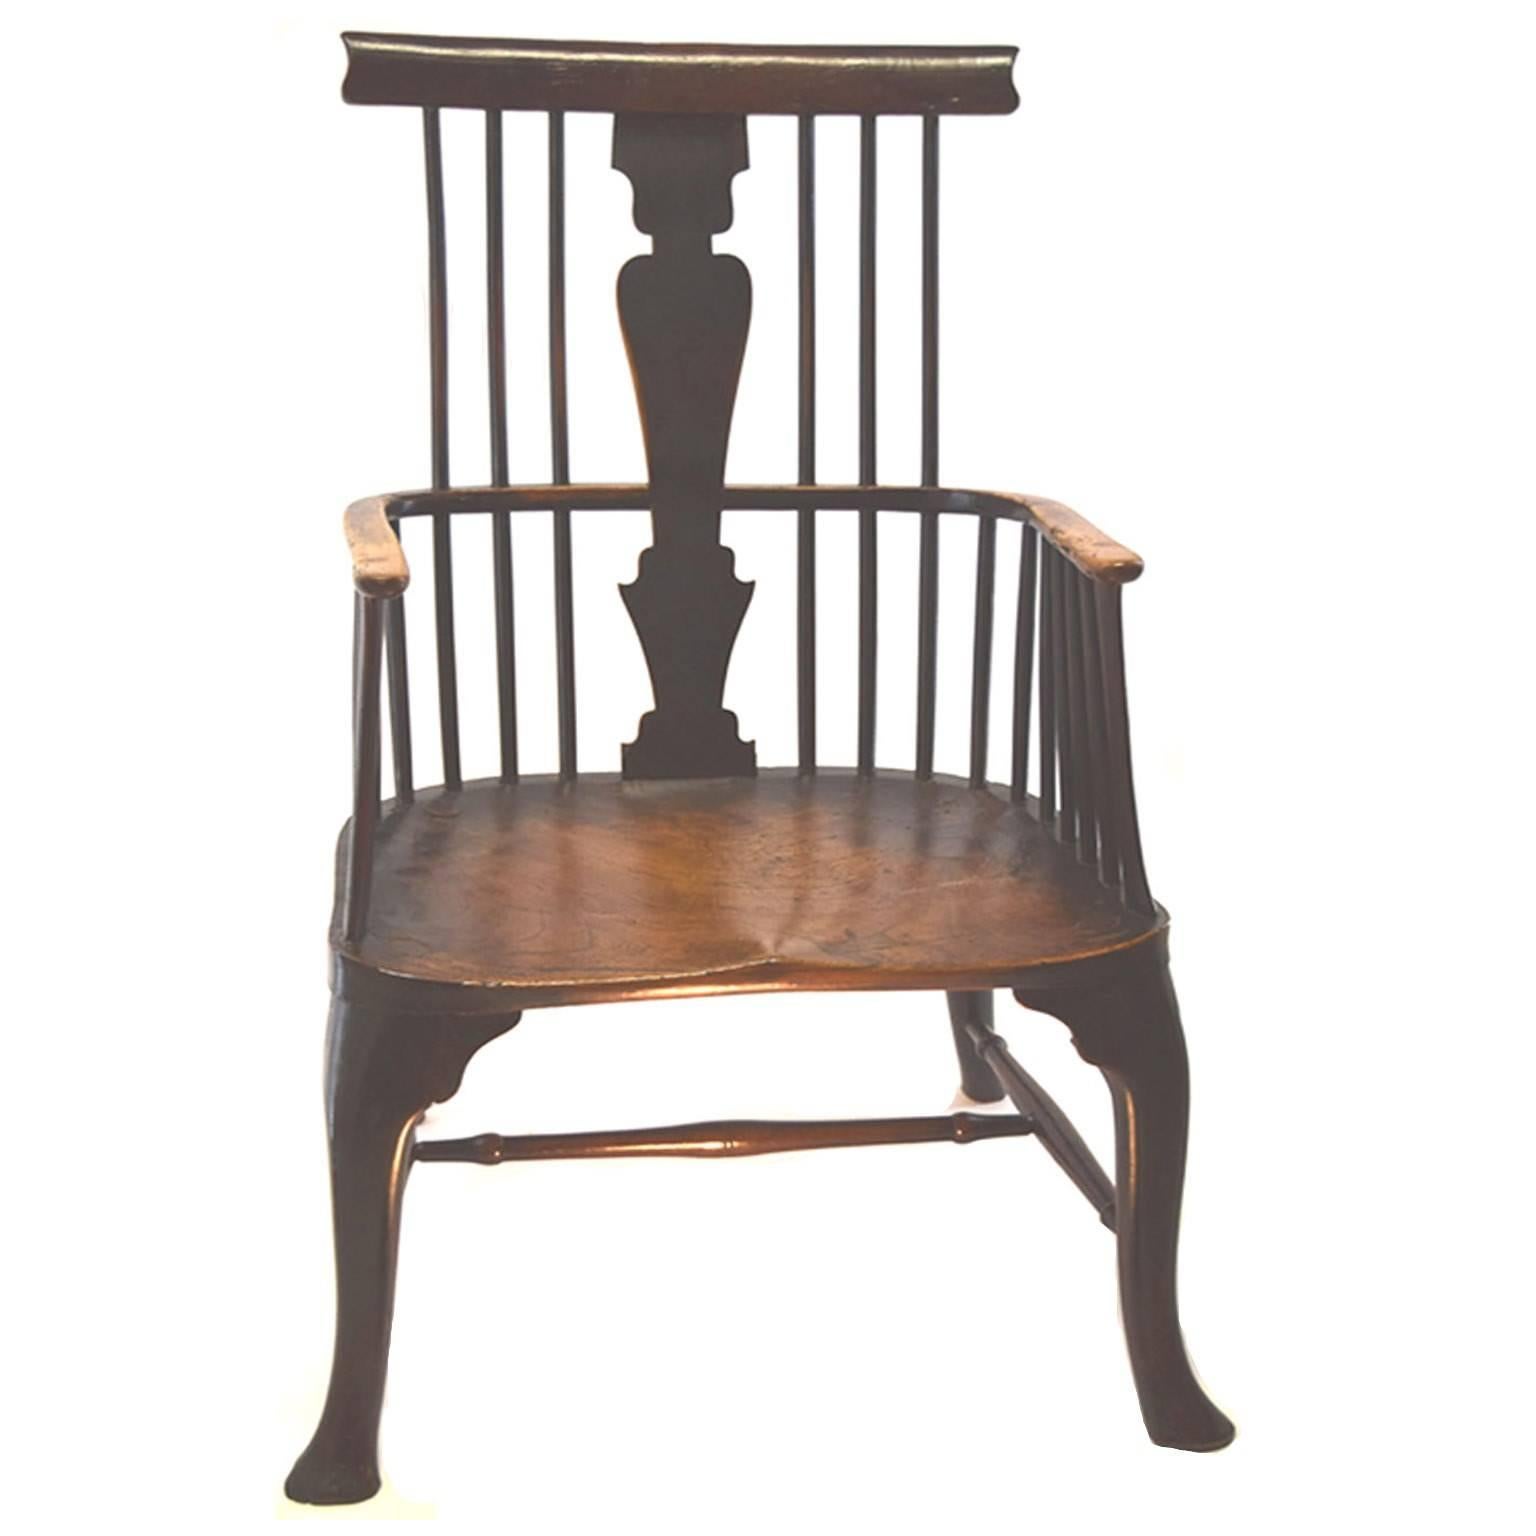 Rare antique English George III period yew wood and elm vasi-comb-back Windsor armchair, with a bowed top rail over spindle filled back centered by a vase-shaped splat, one over the other, the latter extending to the arms, raised on cabriole legs